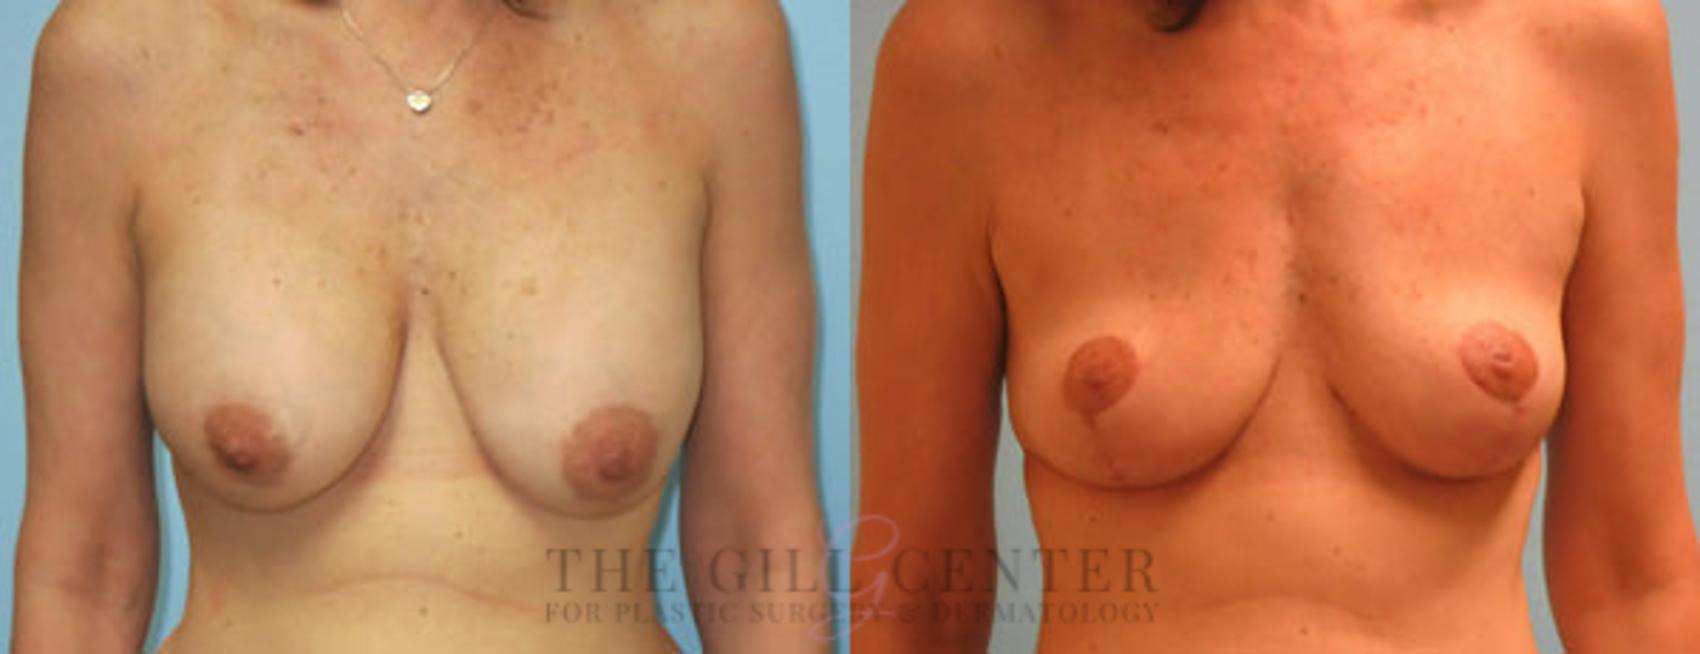 Breast Revisions Case 379 Before & After Front | The Woodlands, TX | The Gill Center for Plastic Surgery and Dermatology